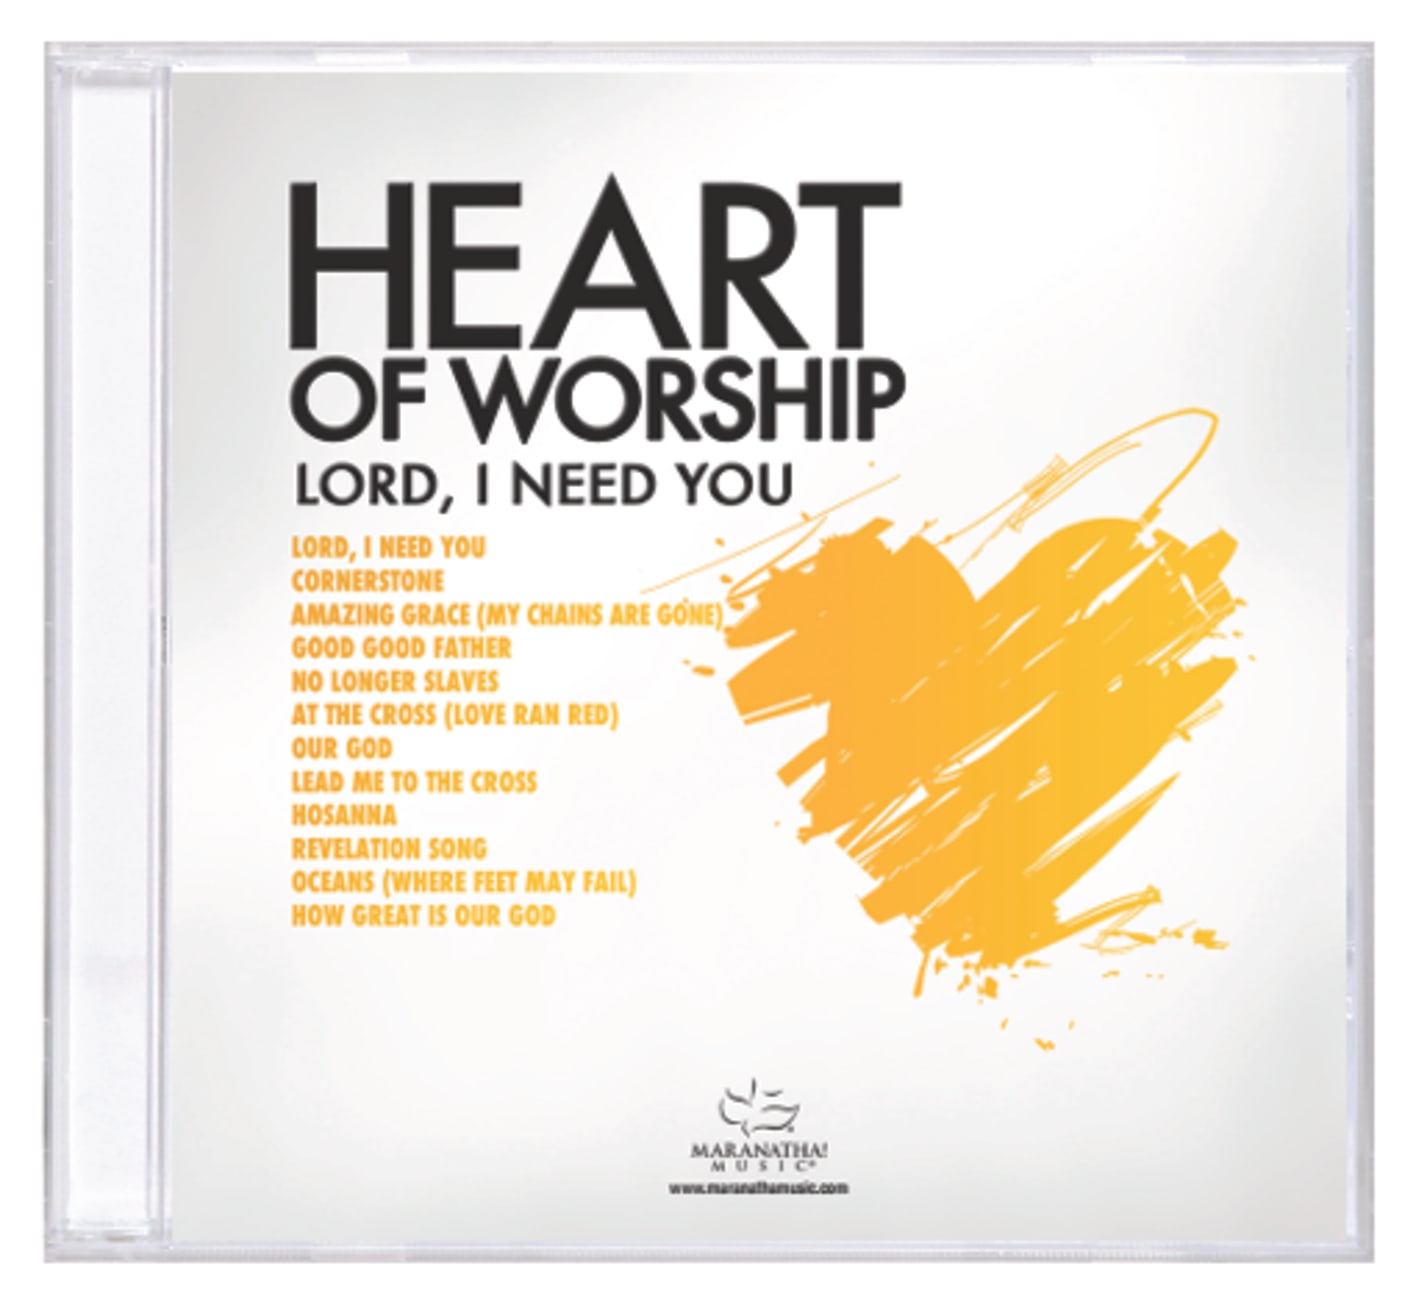 Ccli Heart of Worship - Lord, I Need You Compact Disk